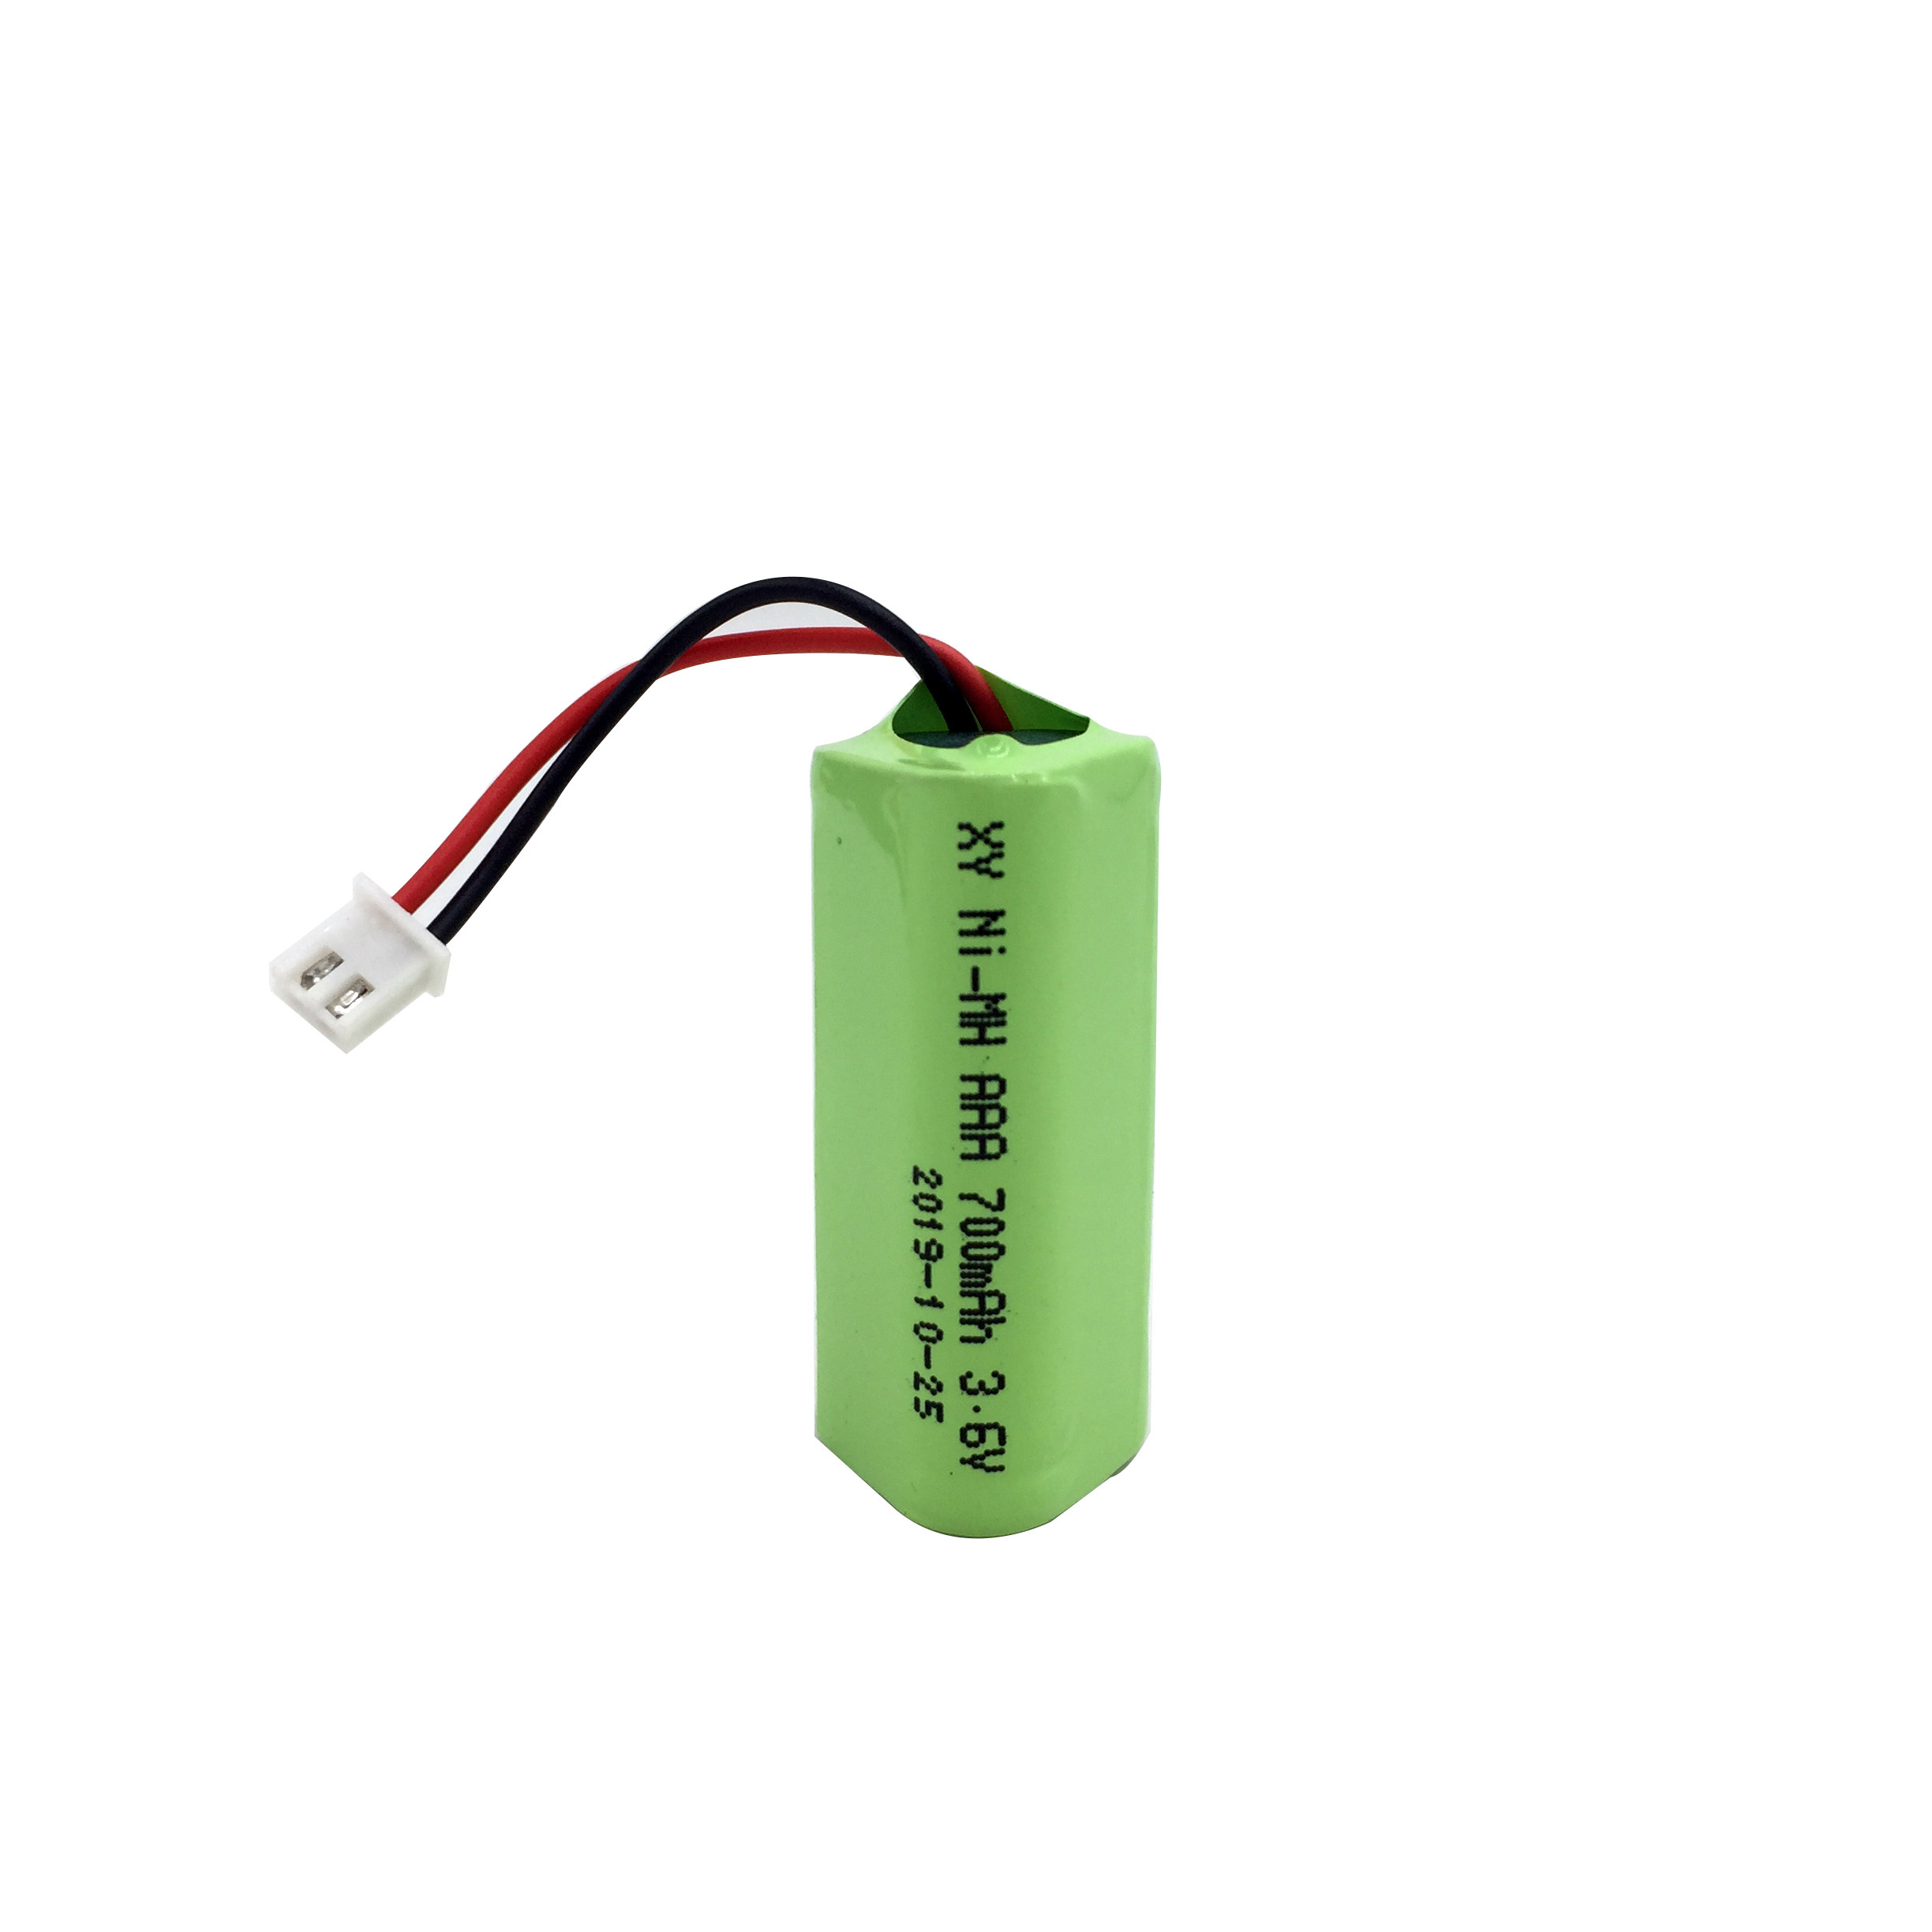 Fire control Emergency light NiMh battery manufacturers take you to understand the three common batteries in fire emergency lights